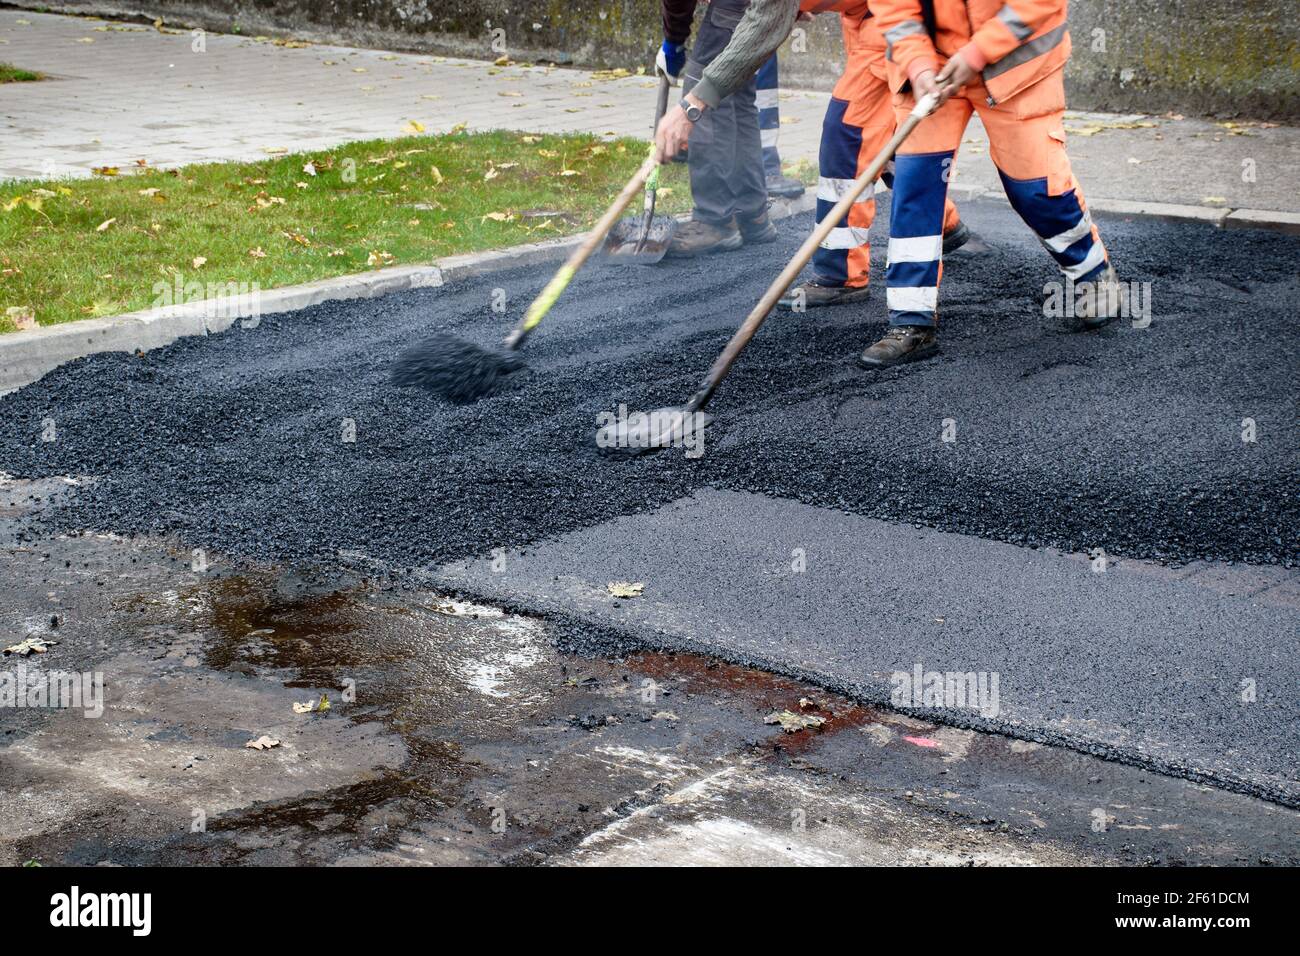 Paving workers move very fast their shovels while adjusting new layer of asphalt in reconstruction of road. Stock Photo